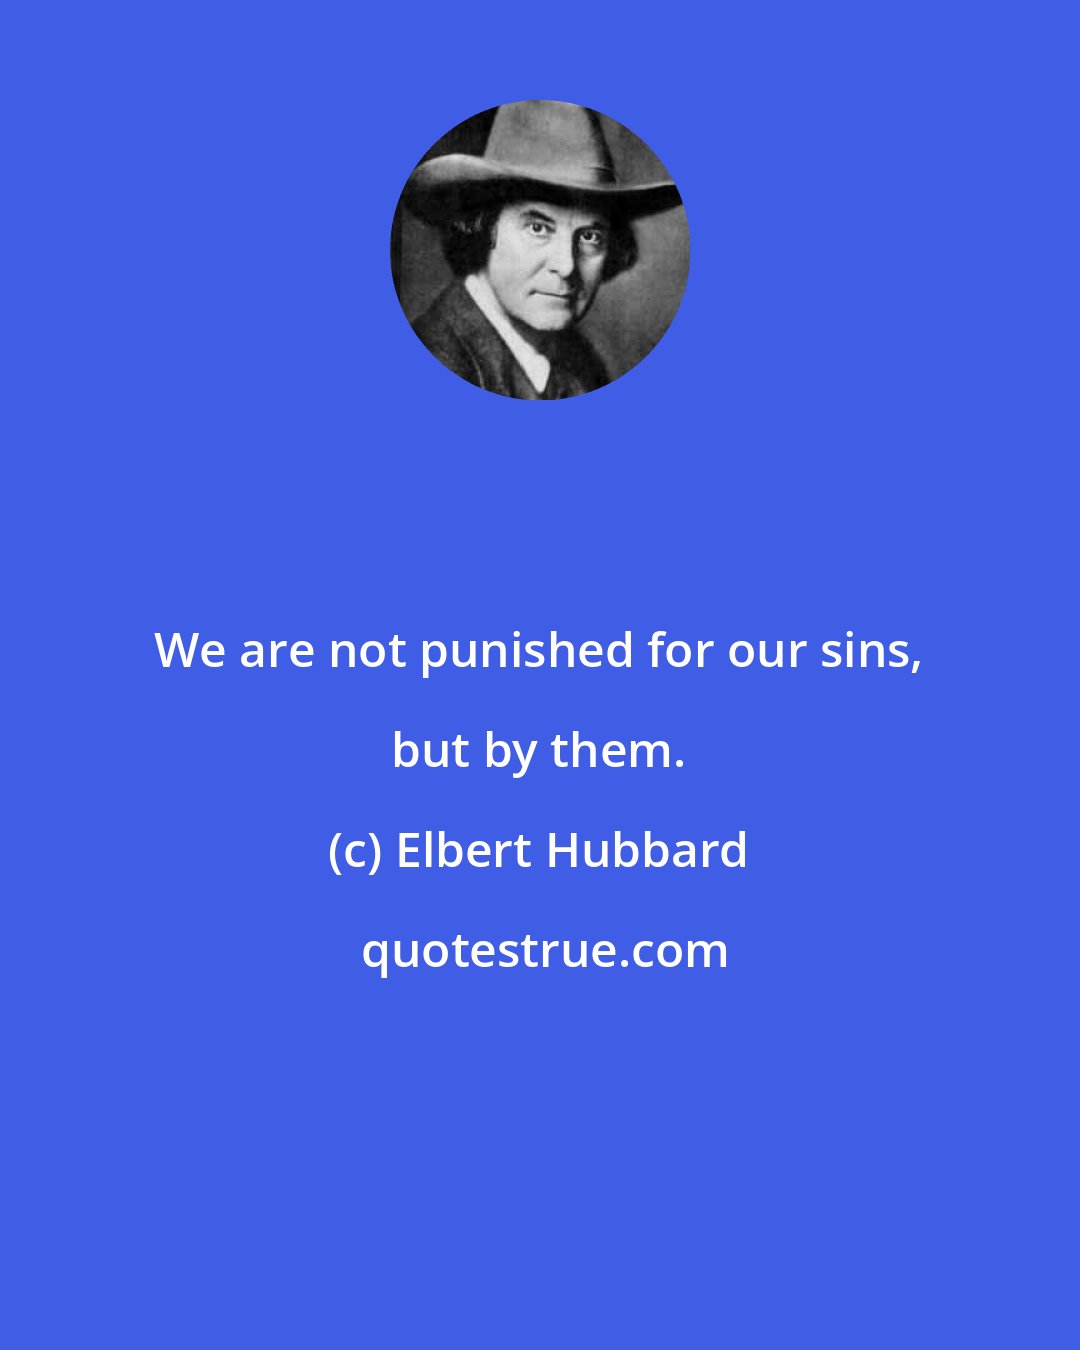 Elbert Hubbard: We are not punished for our sins, but by them.